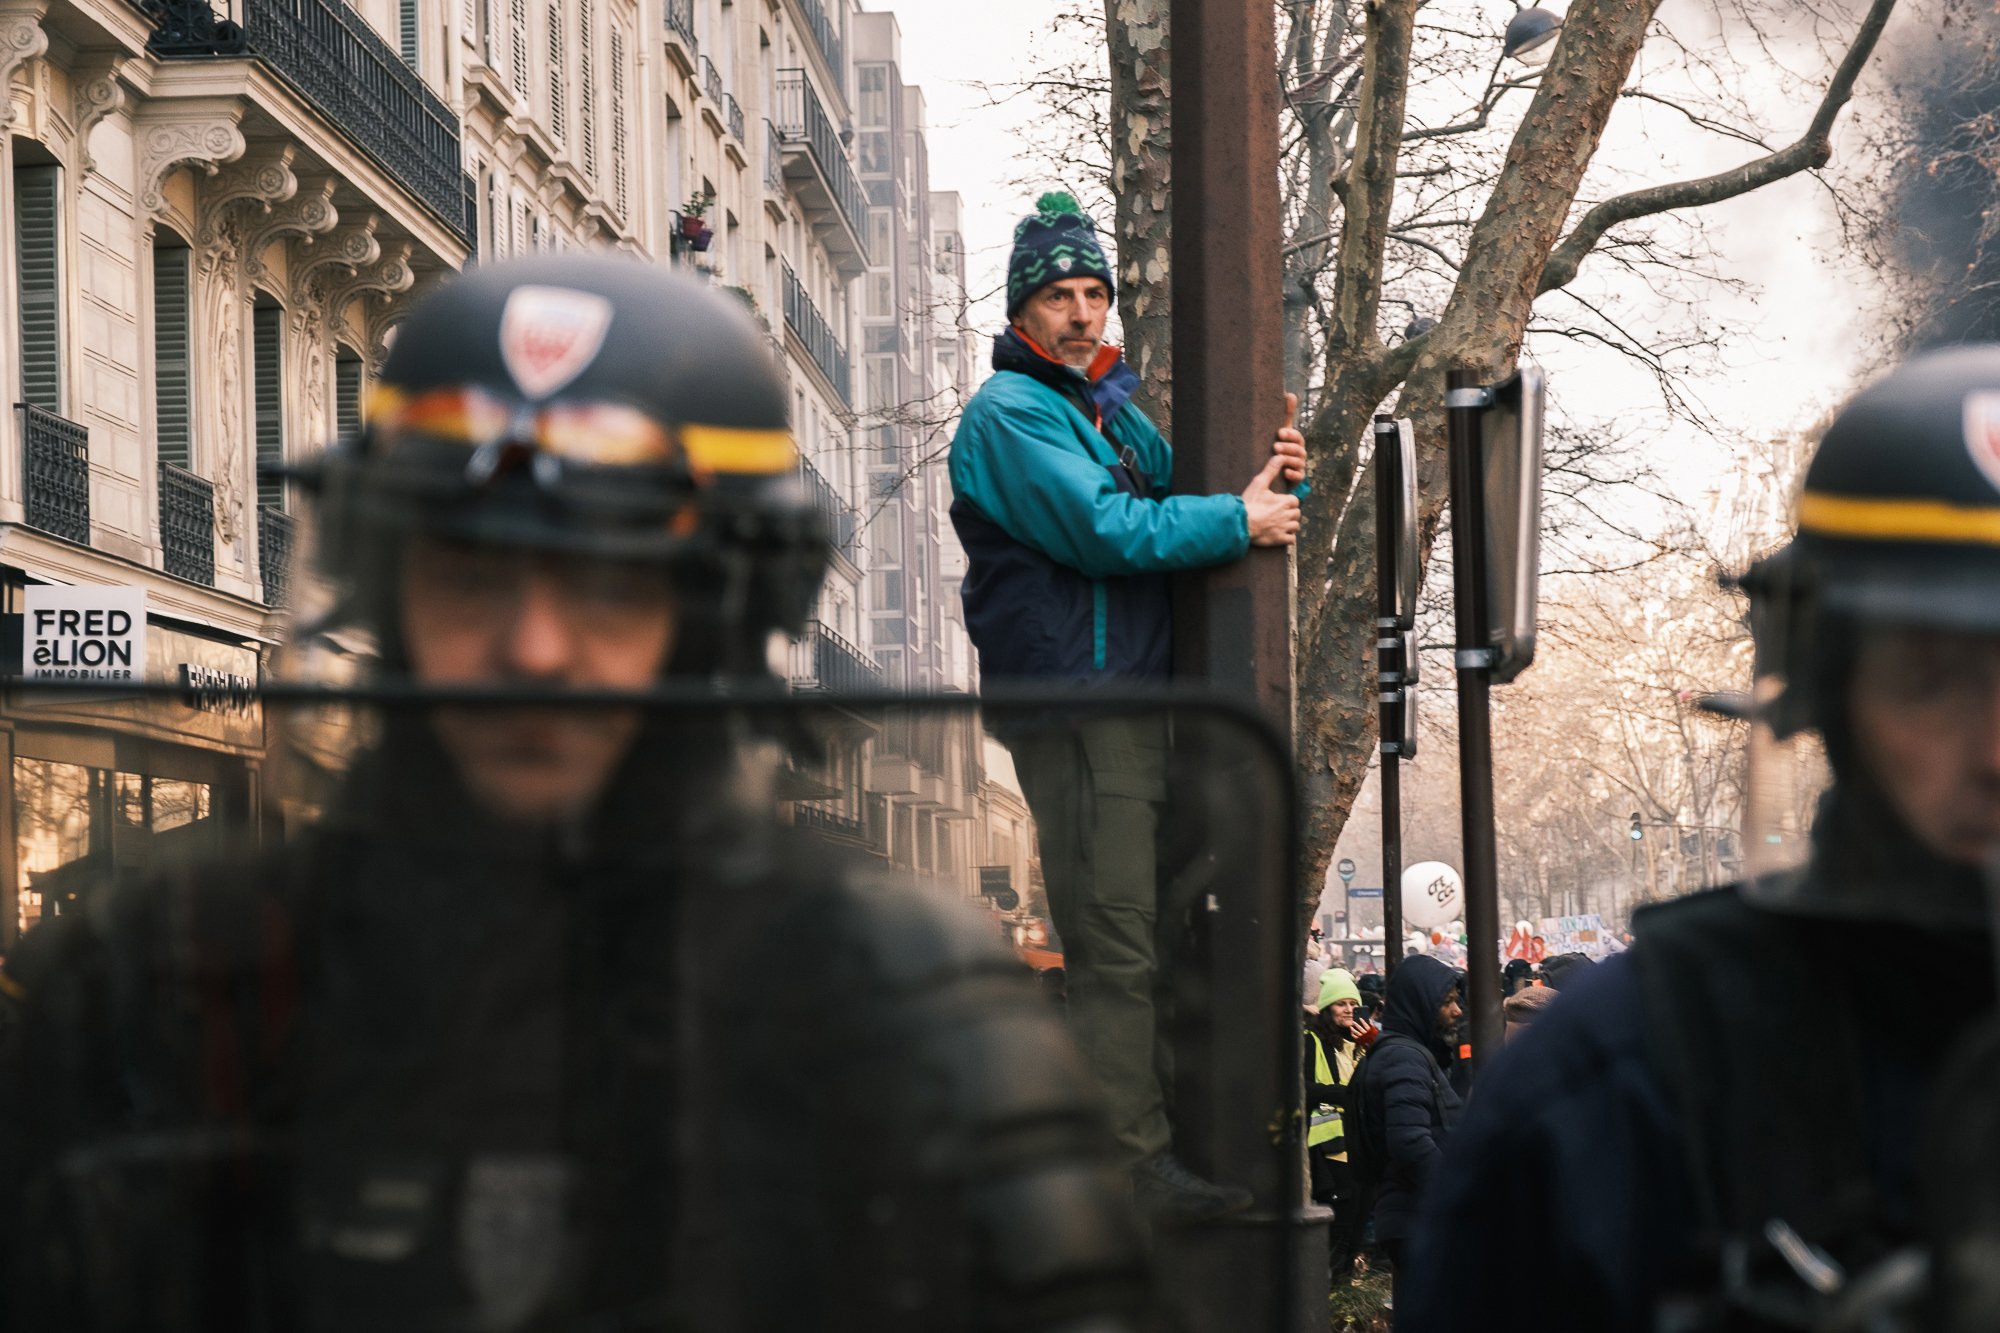  A demonstrator clinging to a tree behind the forces of law and order in Paris, France.